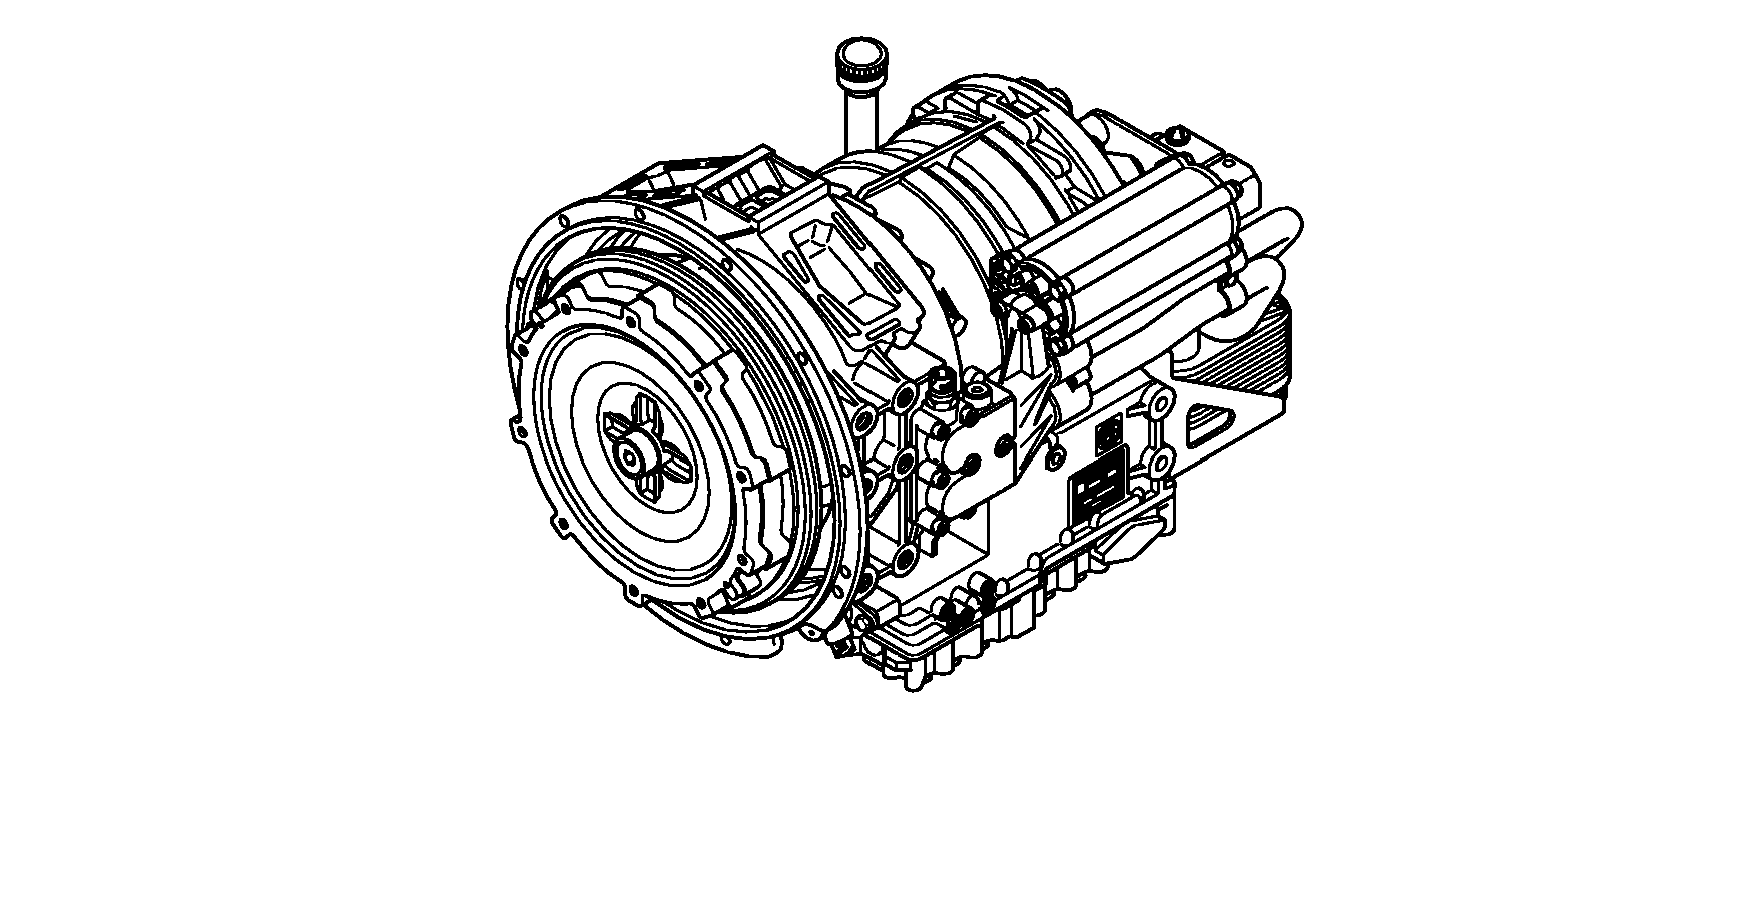 drawing for SCANIA 492858 - EST 46 C (figure 1)